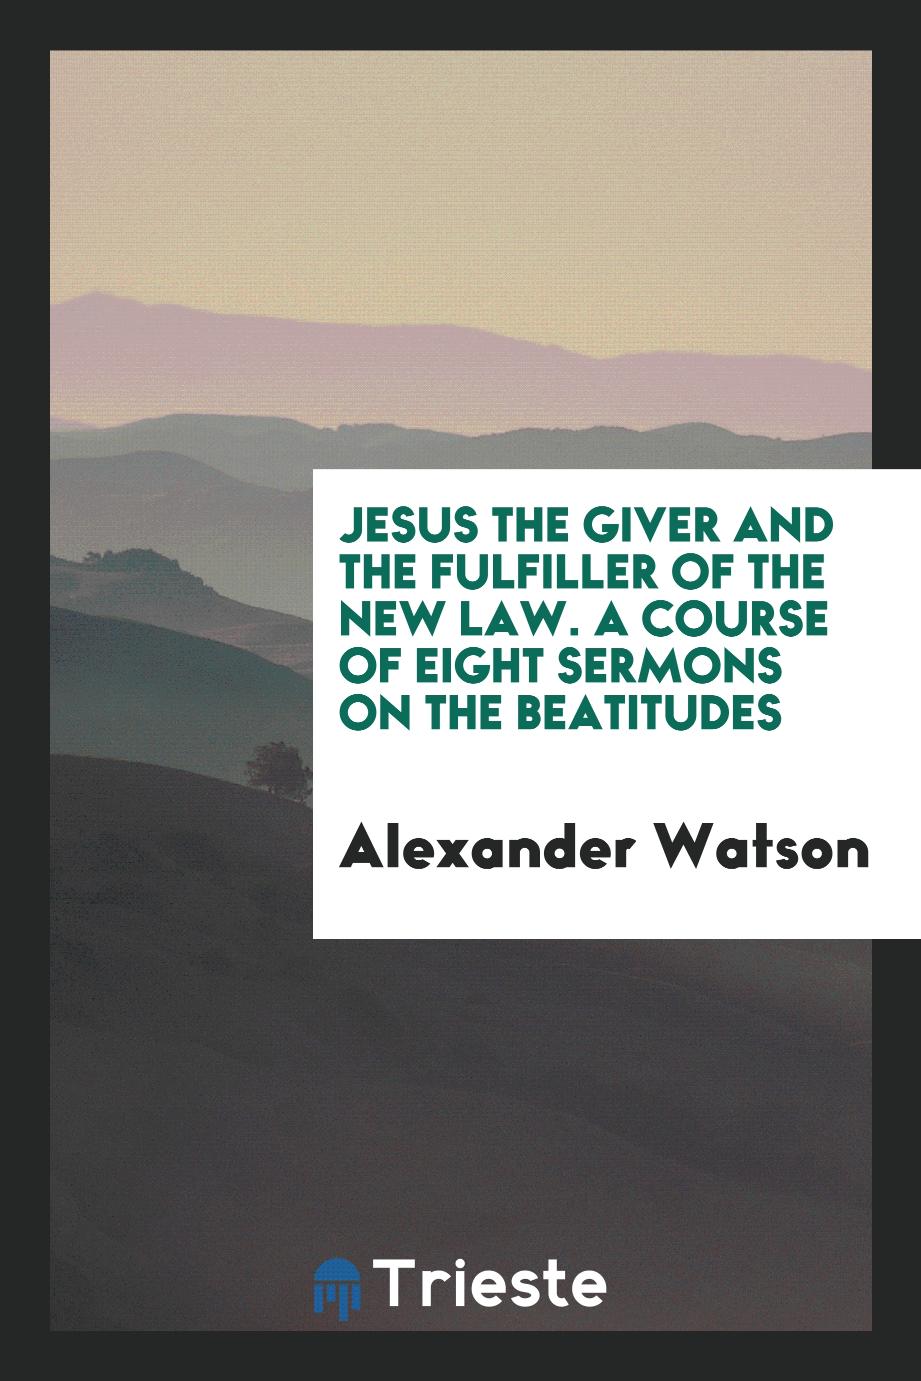 Jesus the Giver and the Fulfiller of the New Law. A Course of Eight Sermons on the Beatitudes